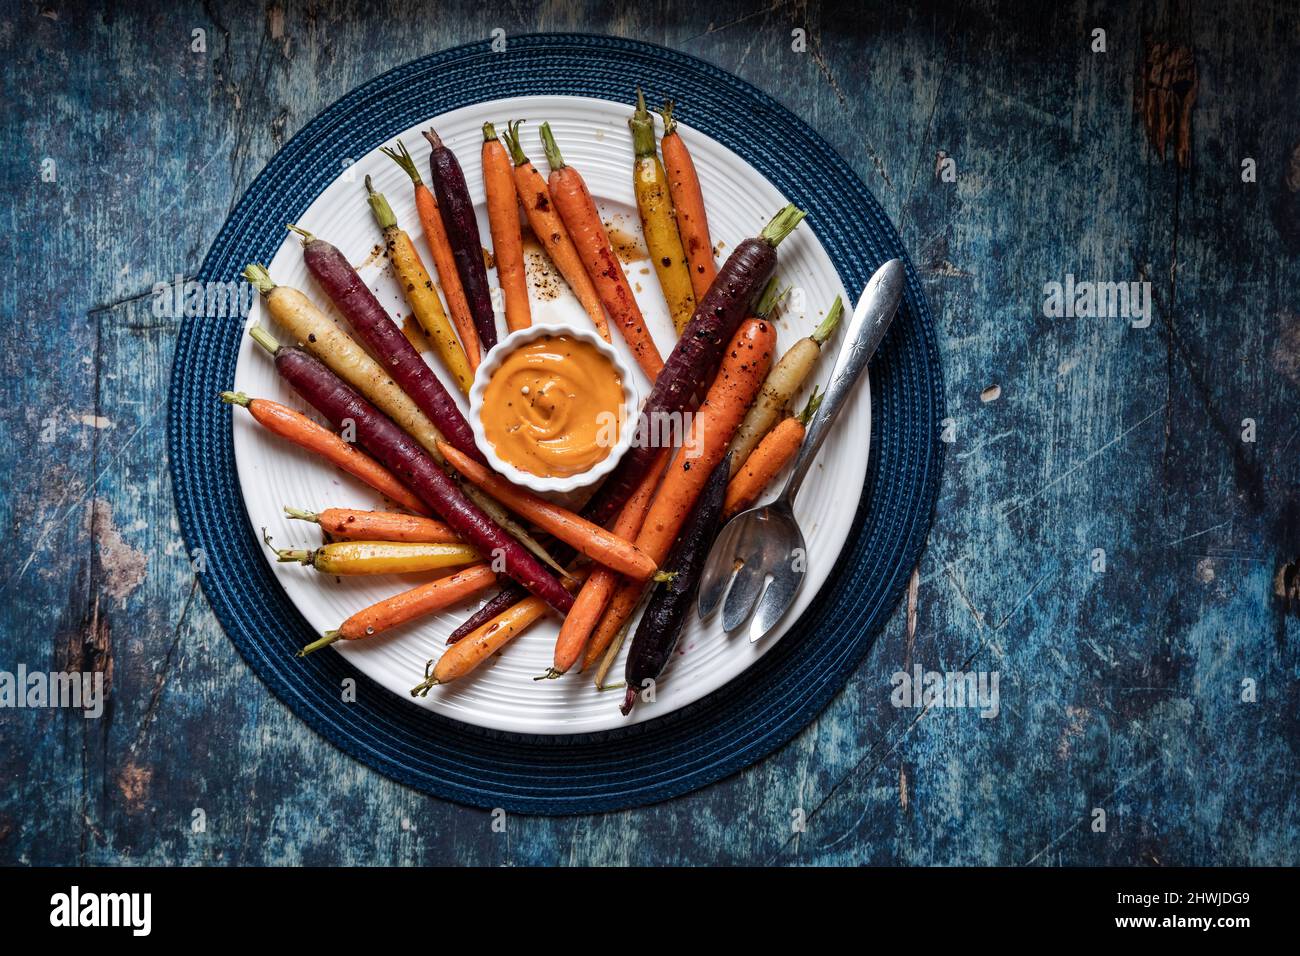 A round dish filled with roasted rainbow carrots and sriracha mayo dip. Stock Photo